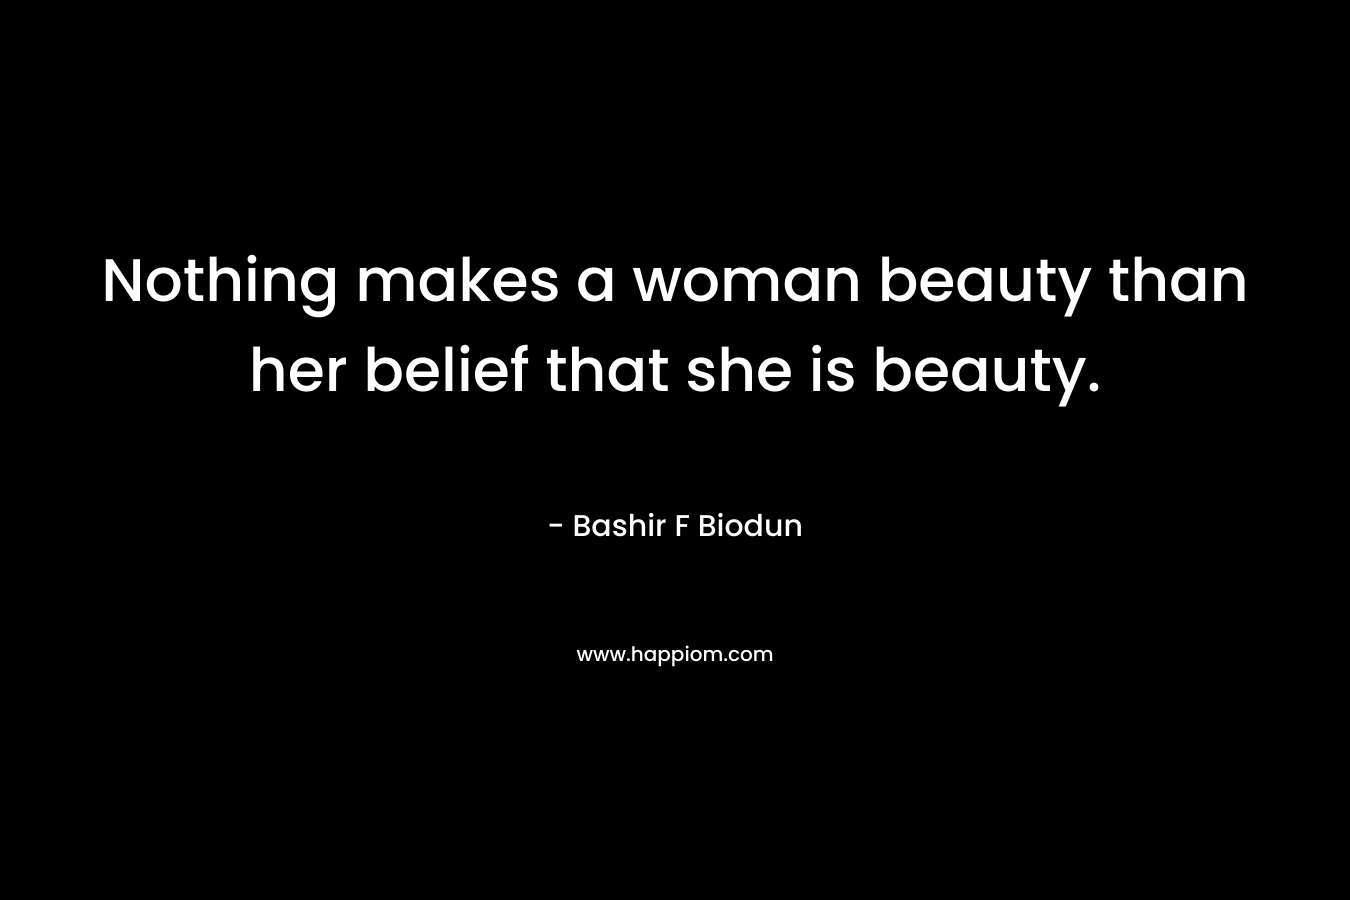 Nothing makes a woman beauty than her belief that she is beauty.